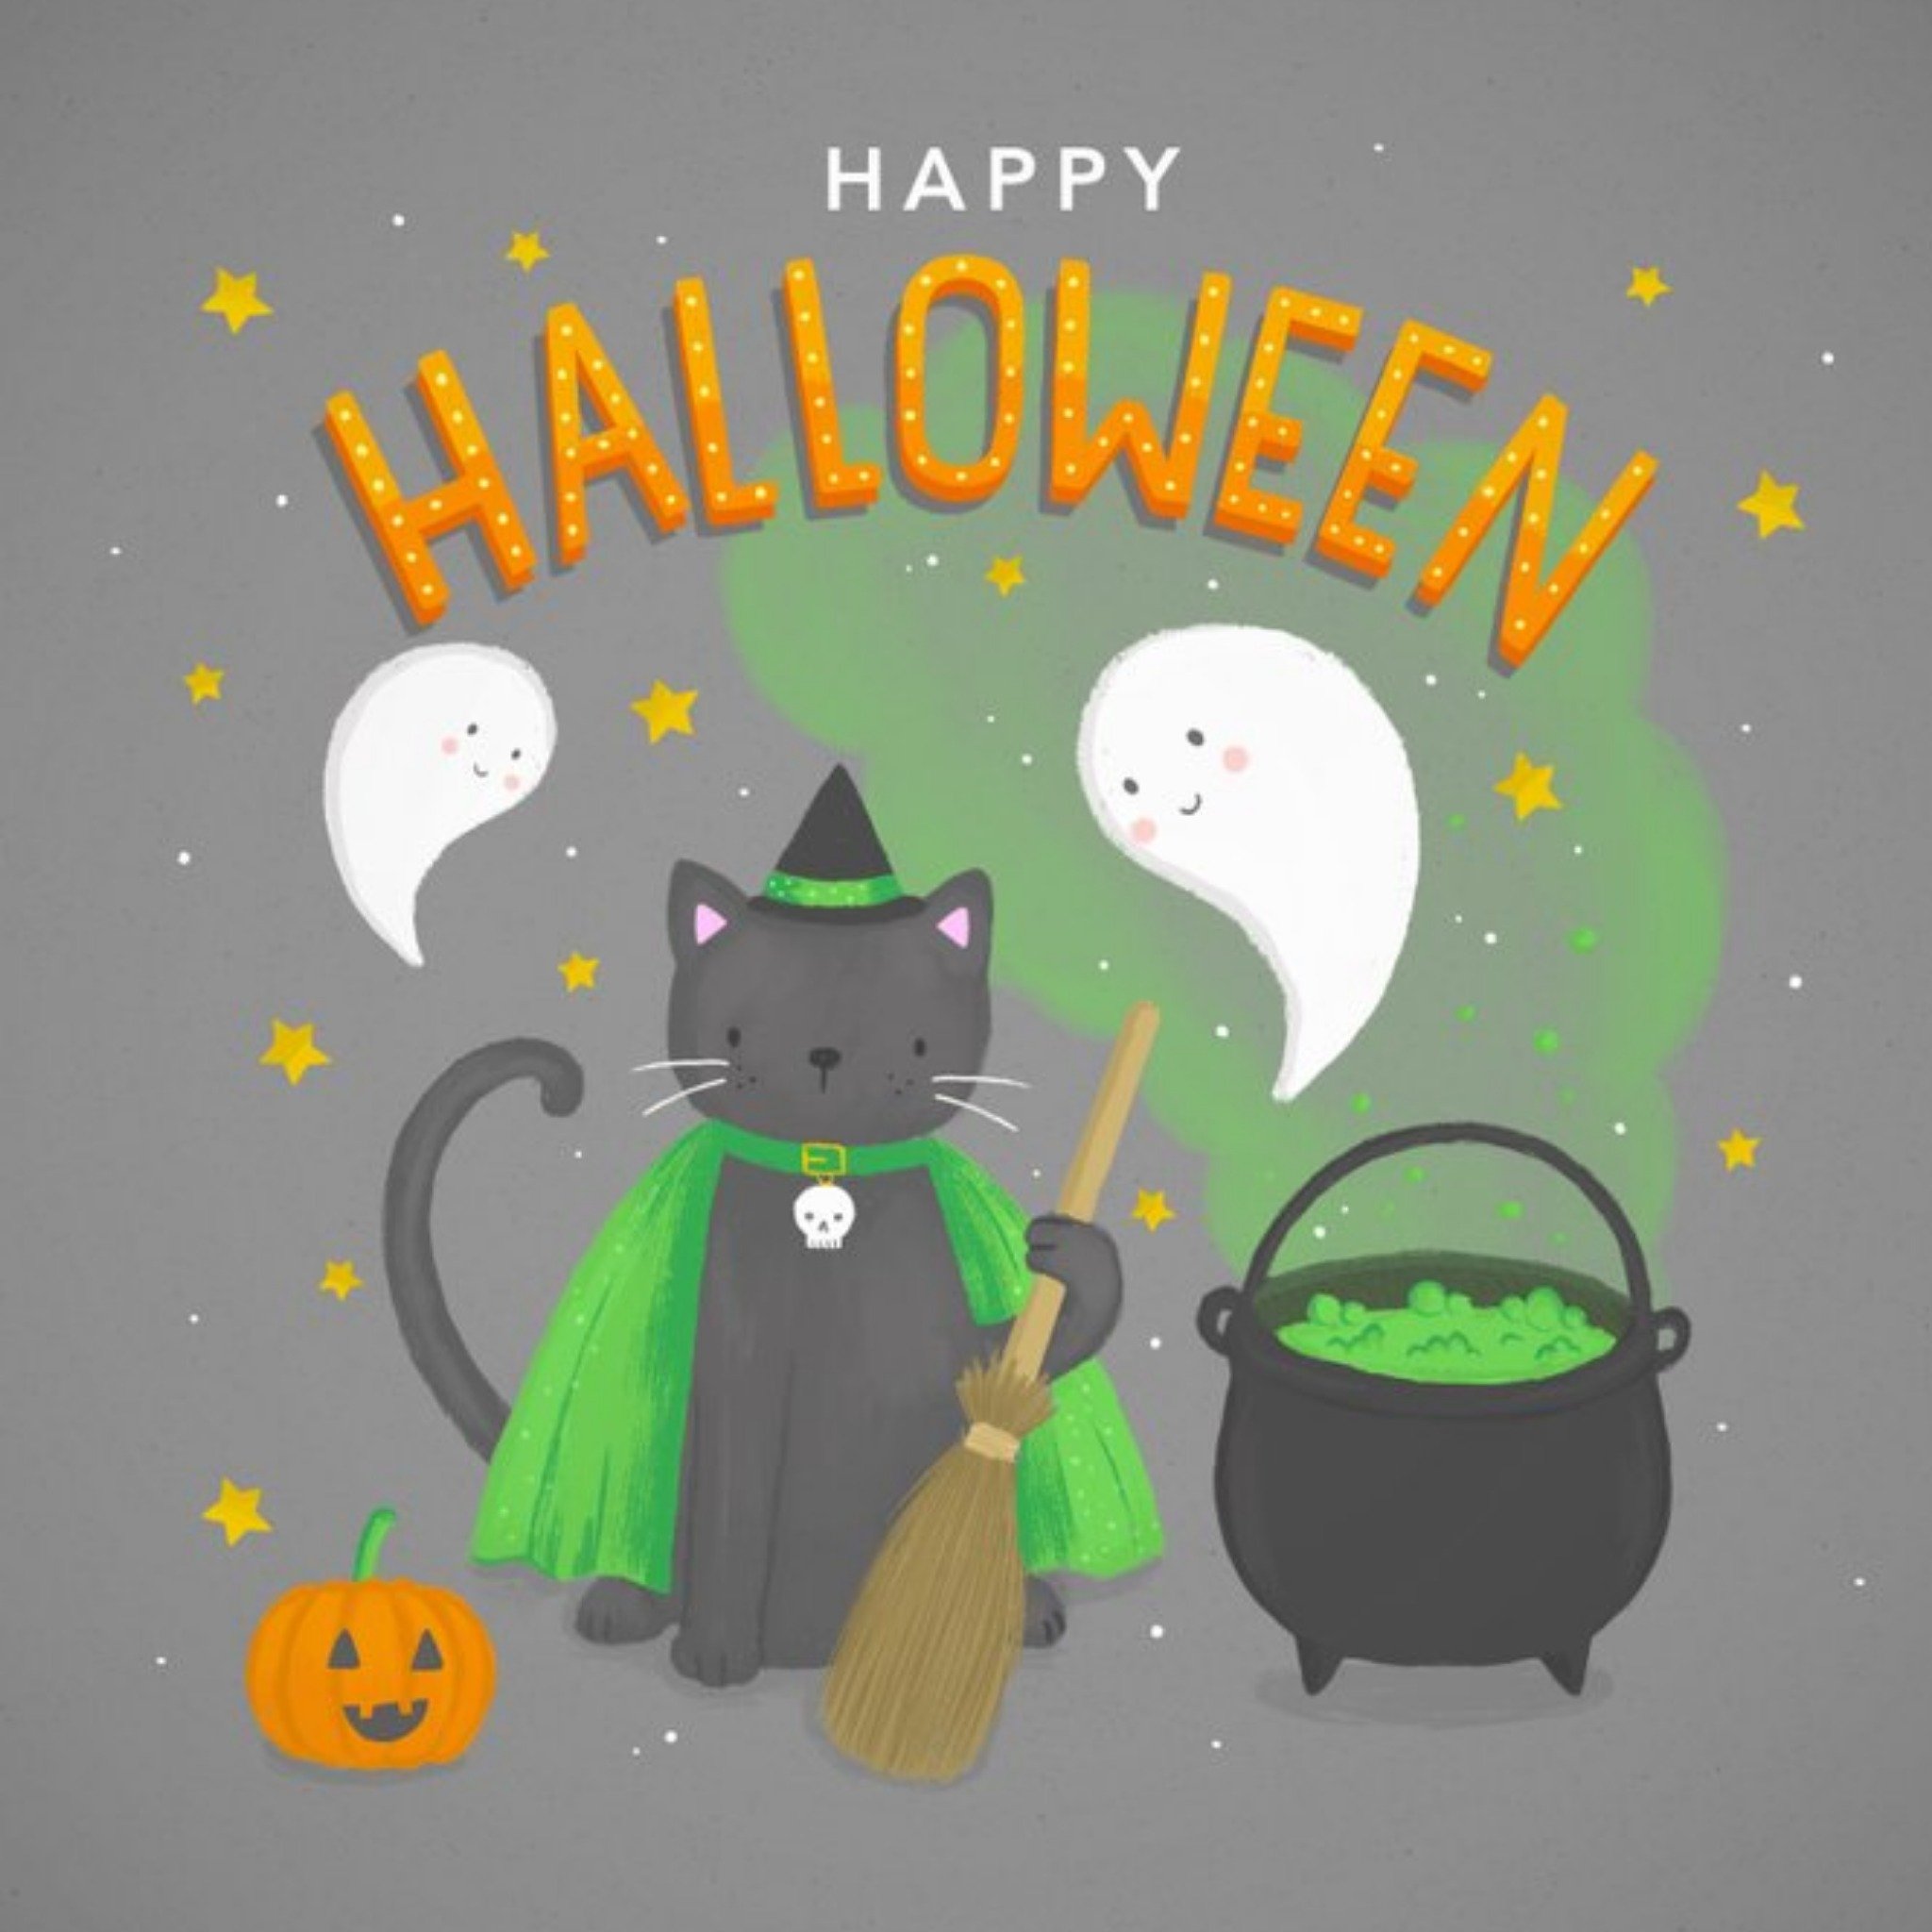 Moonpig Illustration Of A Cat Dressed As A Witch Happy Halloween Card, Square